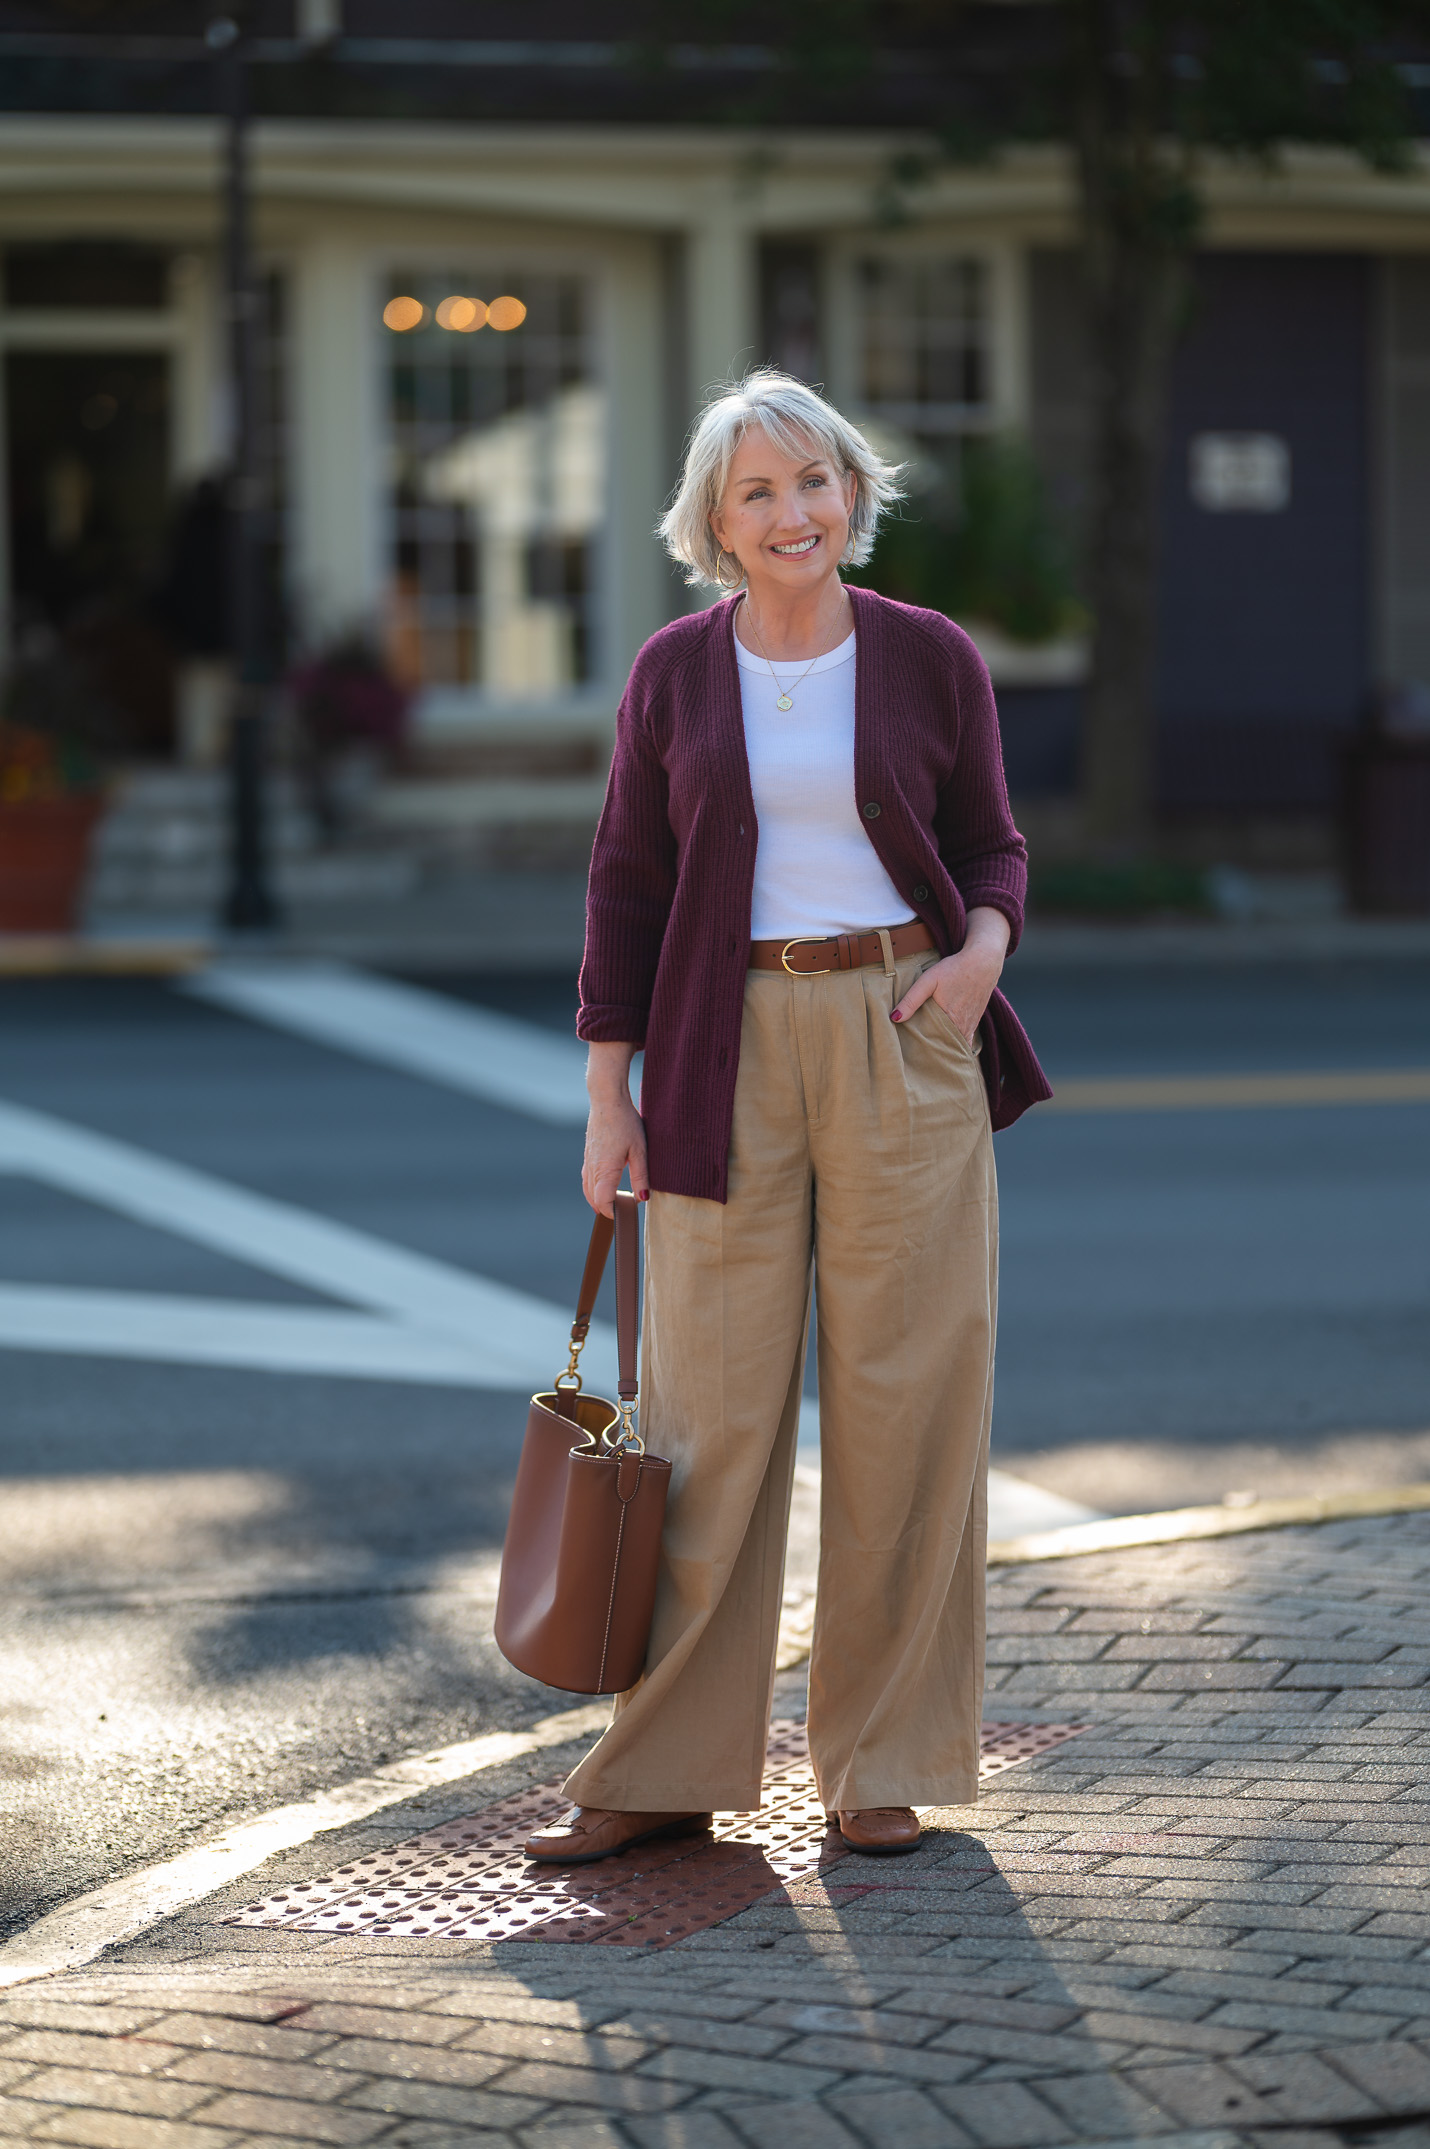 Wide Leg Pants with Loafers Outfits (21 ideas & outfits)